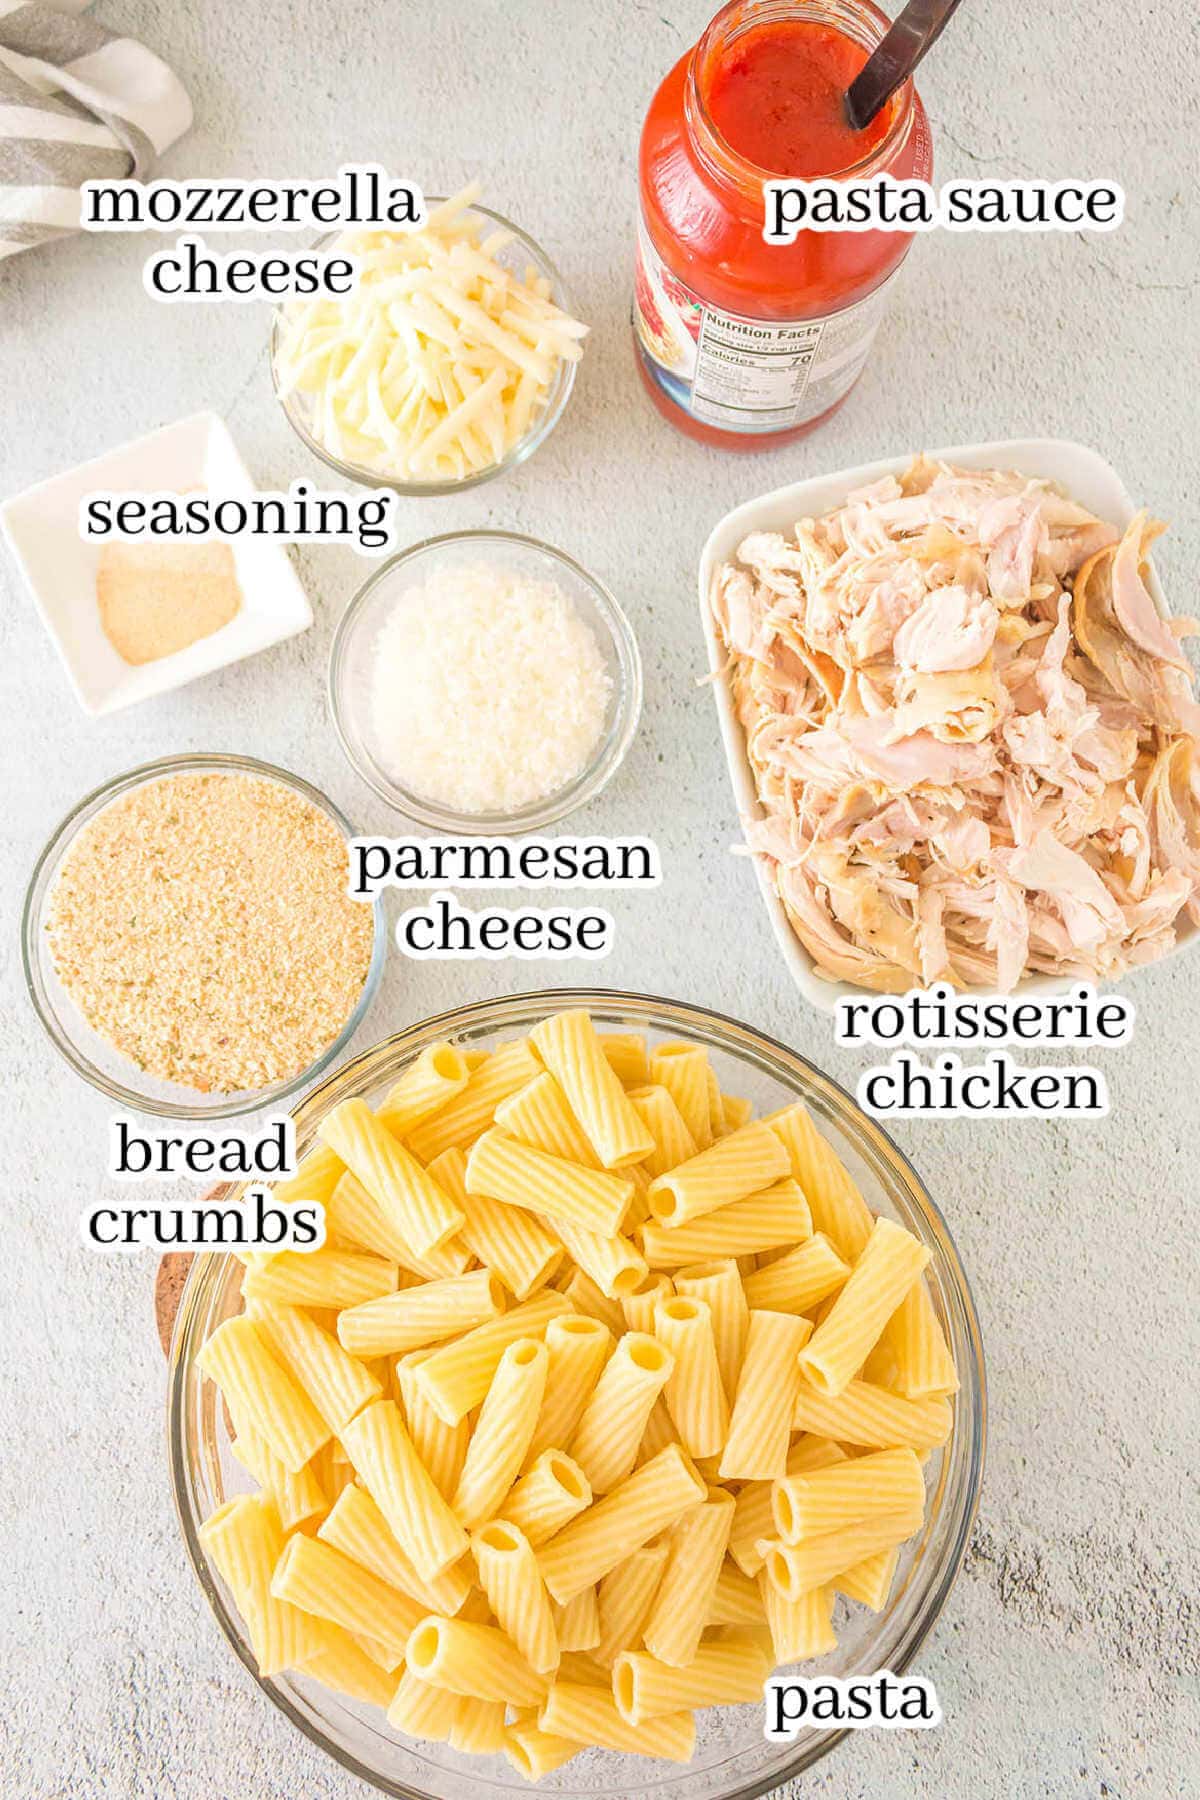 Ingredients to make pasta bake, with print overlay.